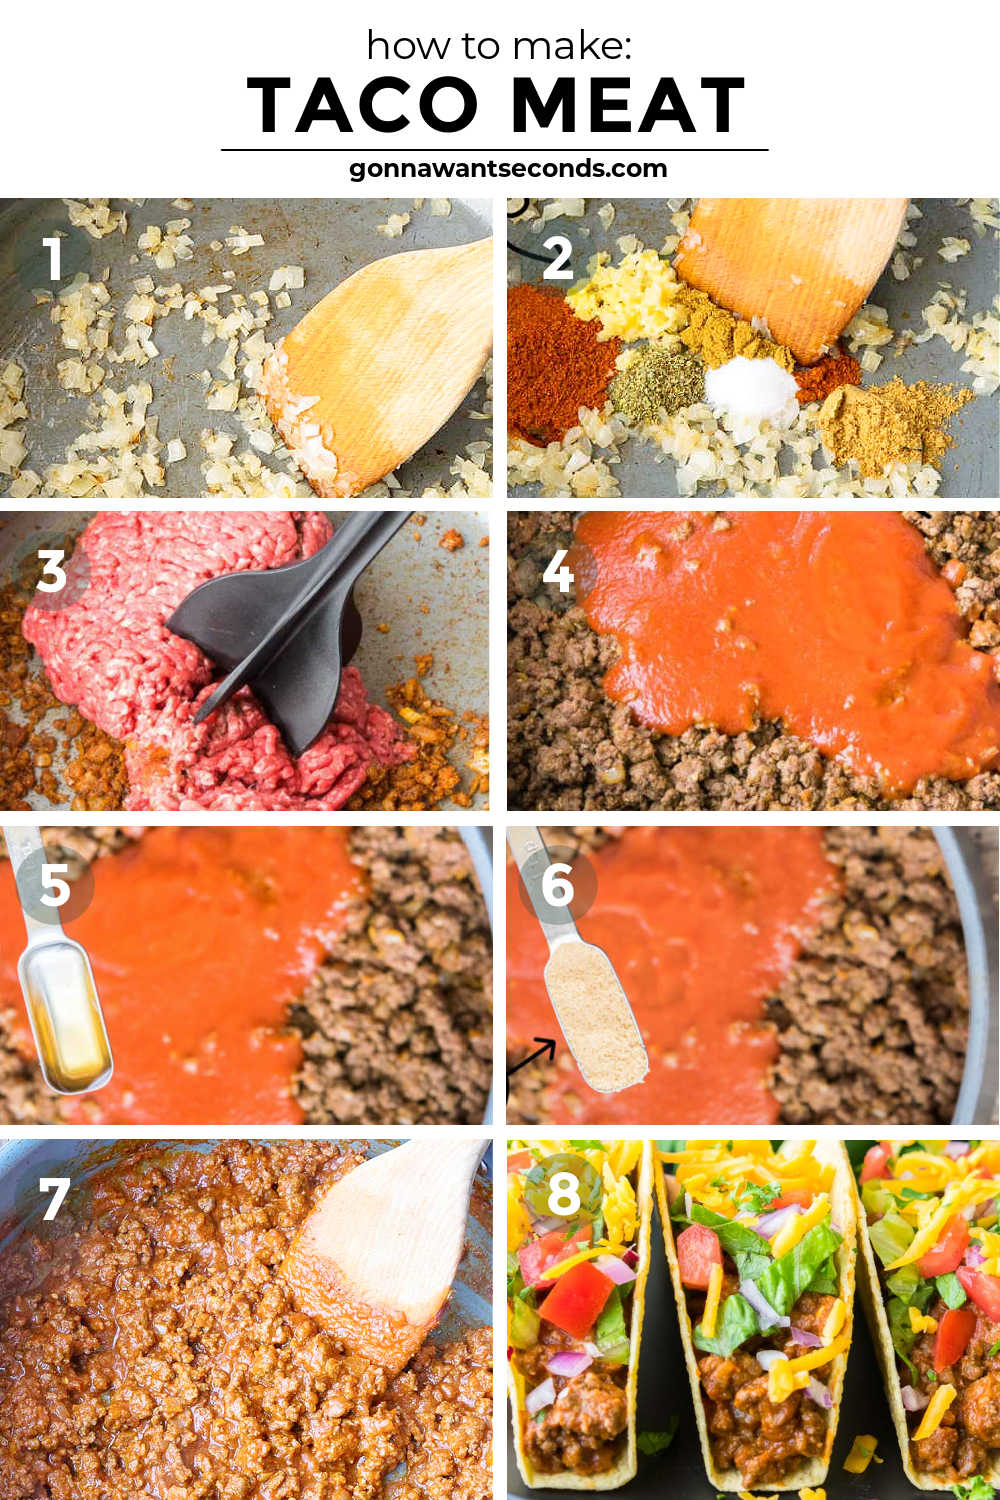 Step by step how to make taco meat